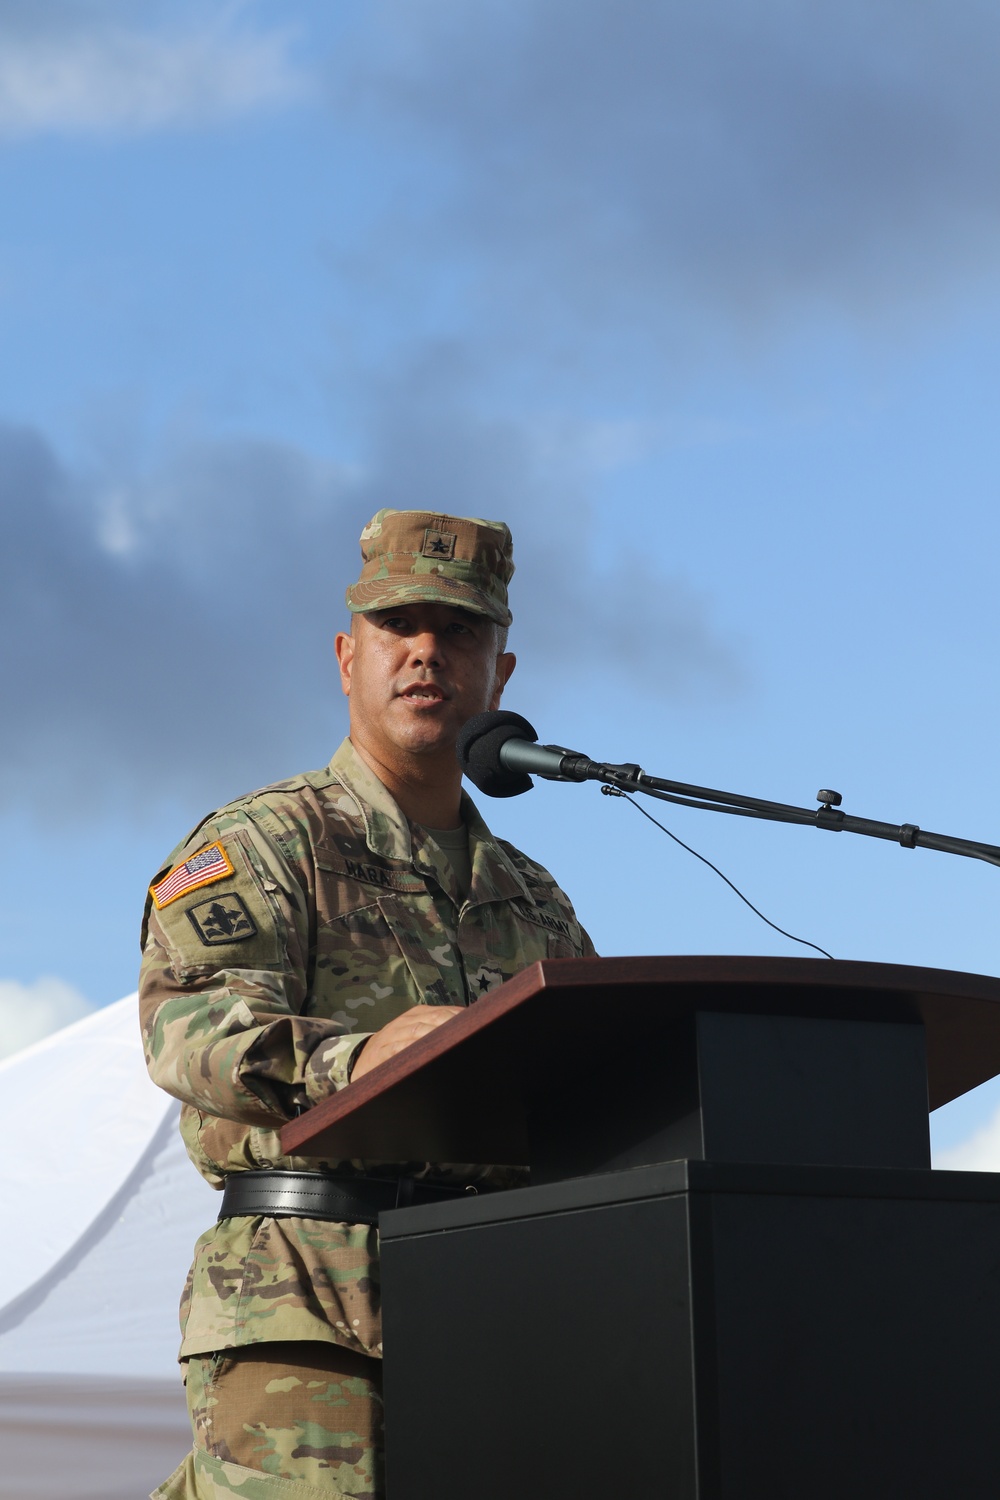 Hawaii Army National Guard Change of Command Ceremony